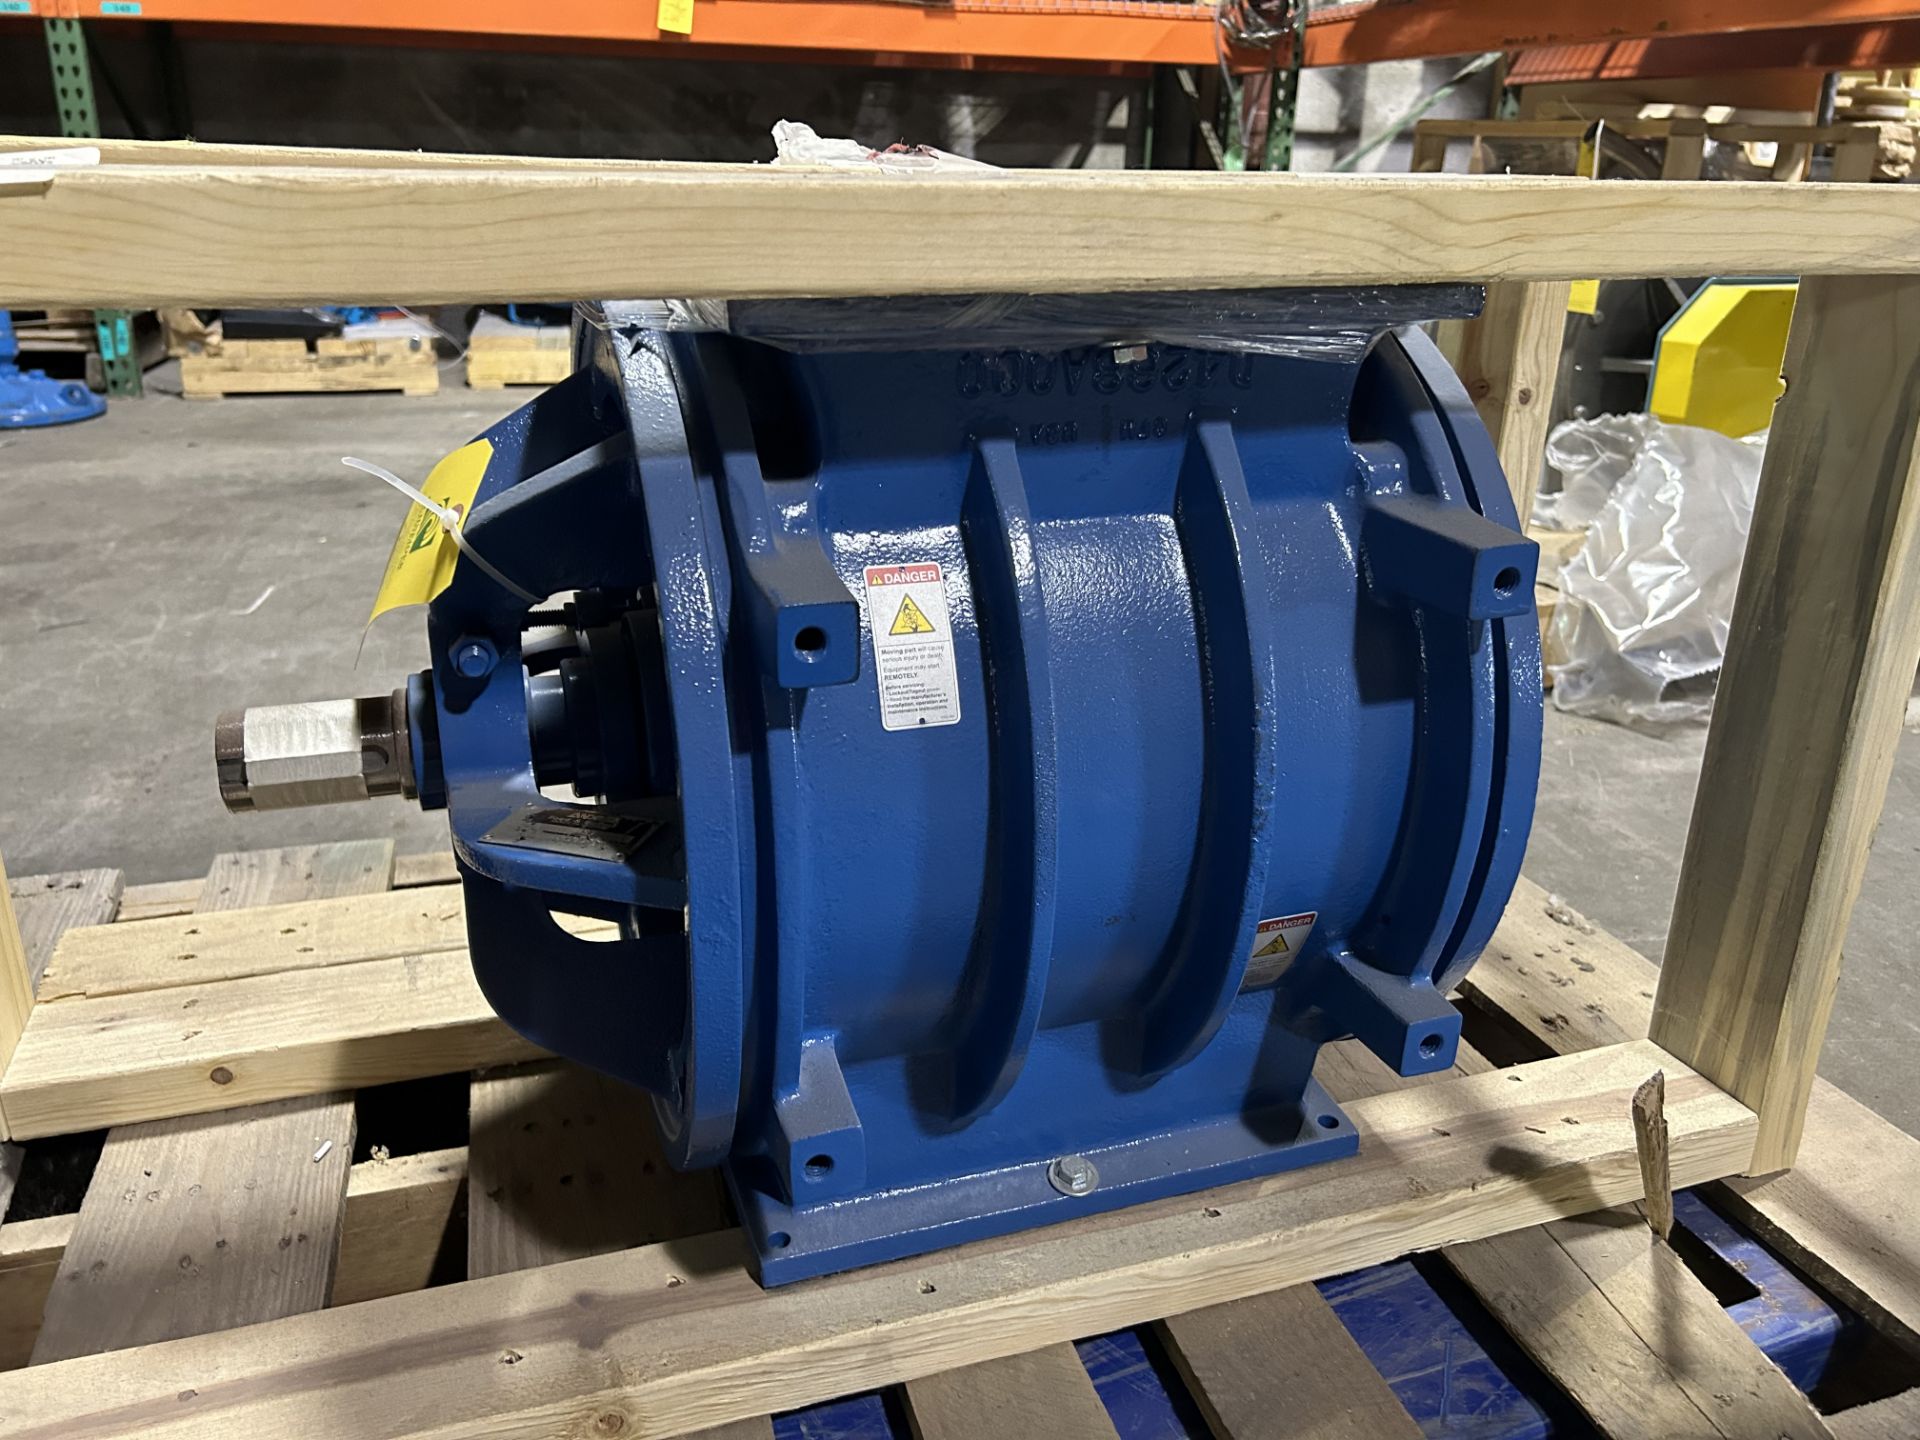 Andritz Rotary Valve , Rigging & Loading Fee: $125 - Image 3 of 9